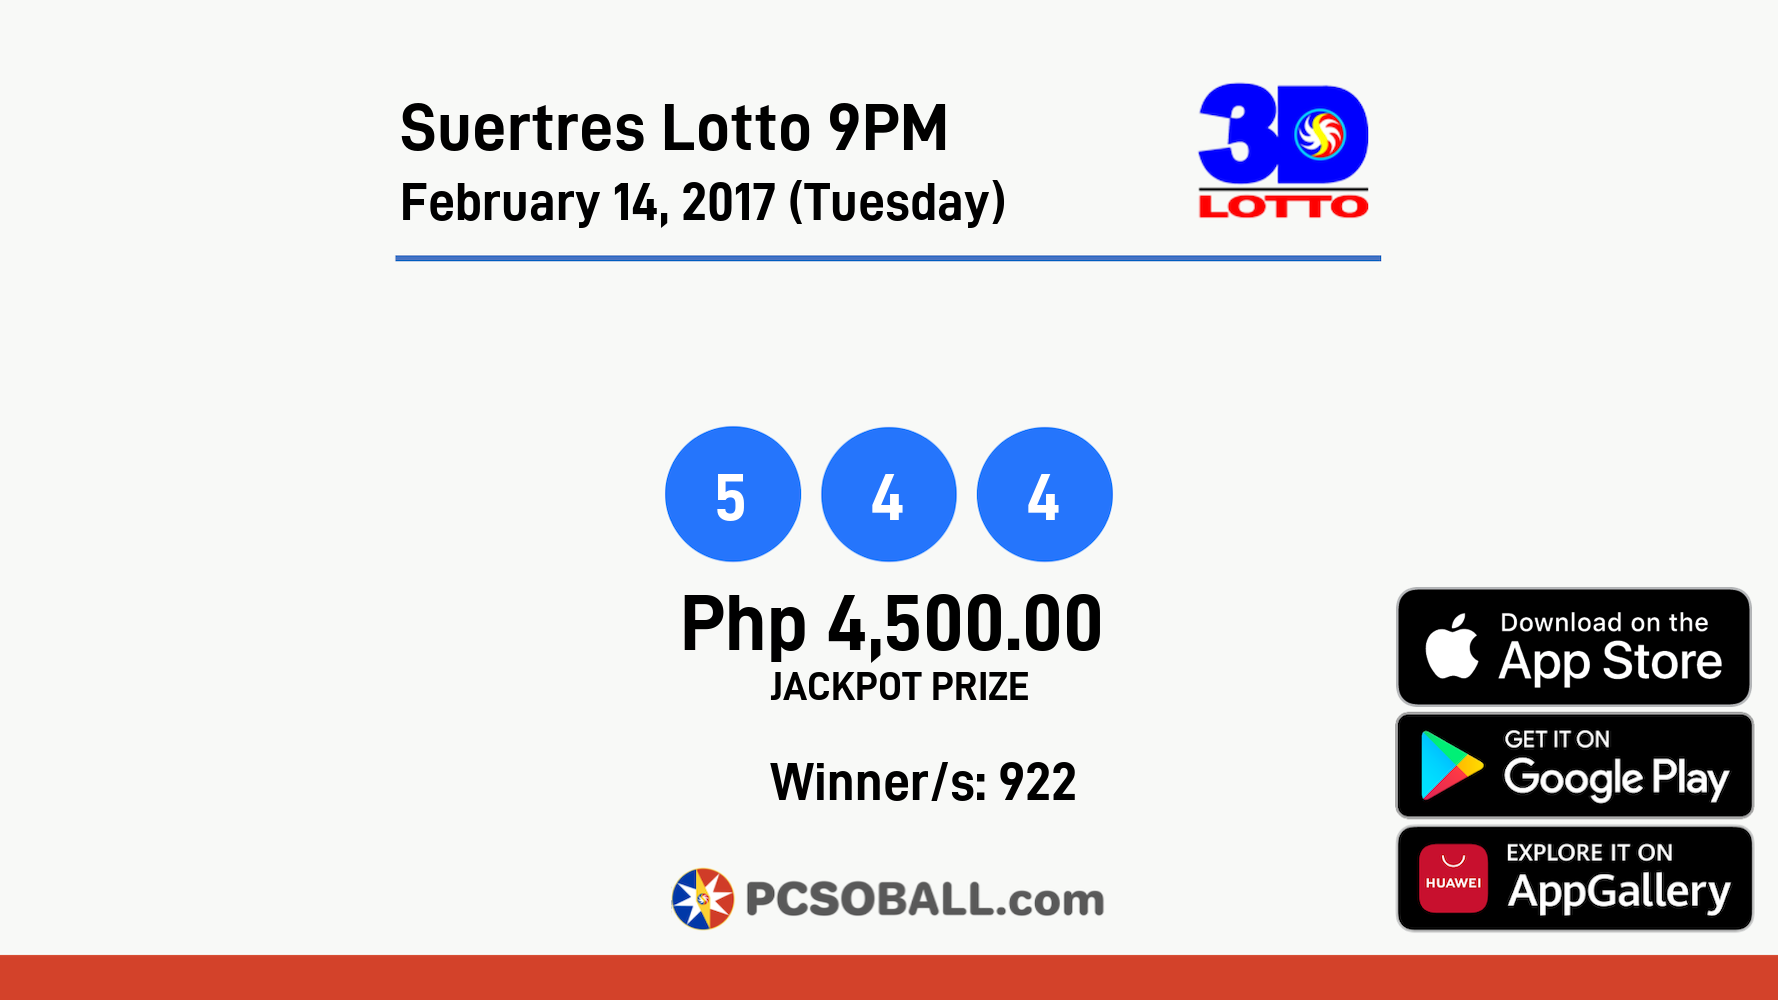 Suertres Lotto 9PM February 14, 2017 (Tuesday) Result